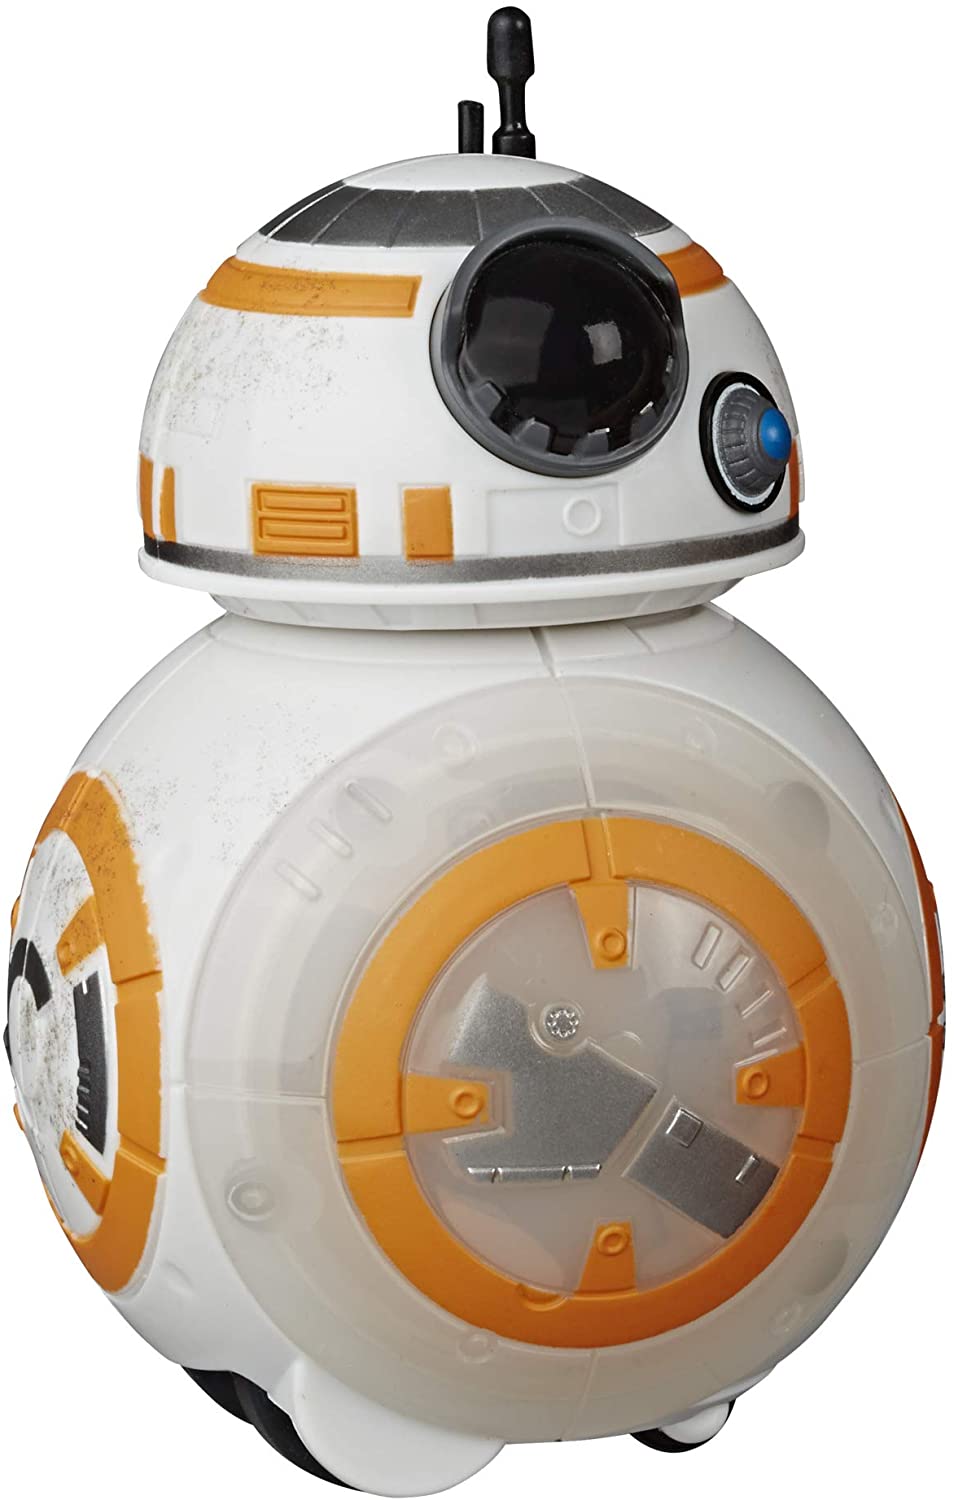 Star Wars SW E9 IP Spark and Go BB8